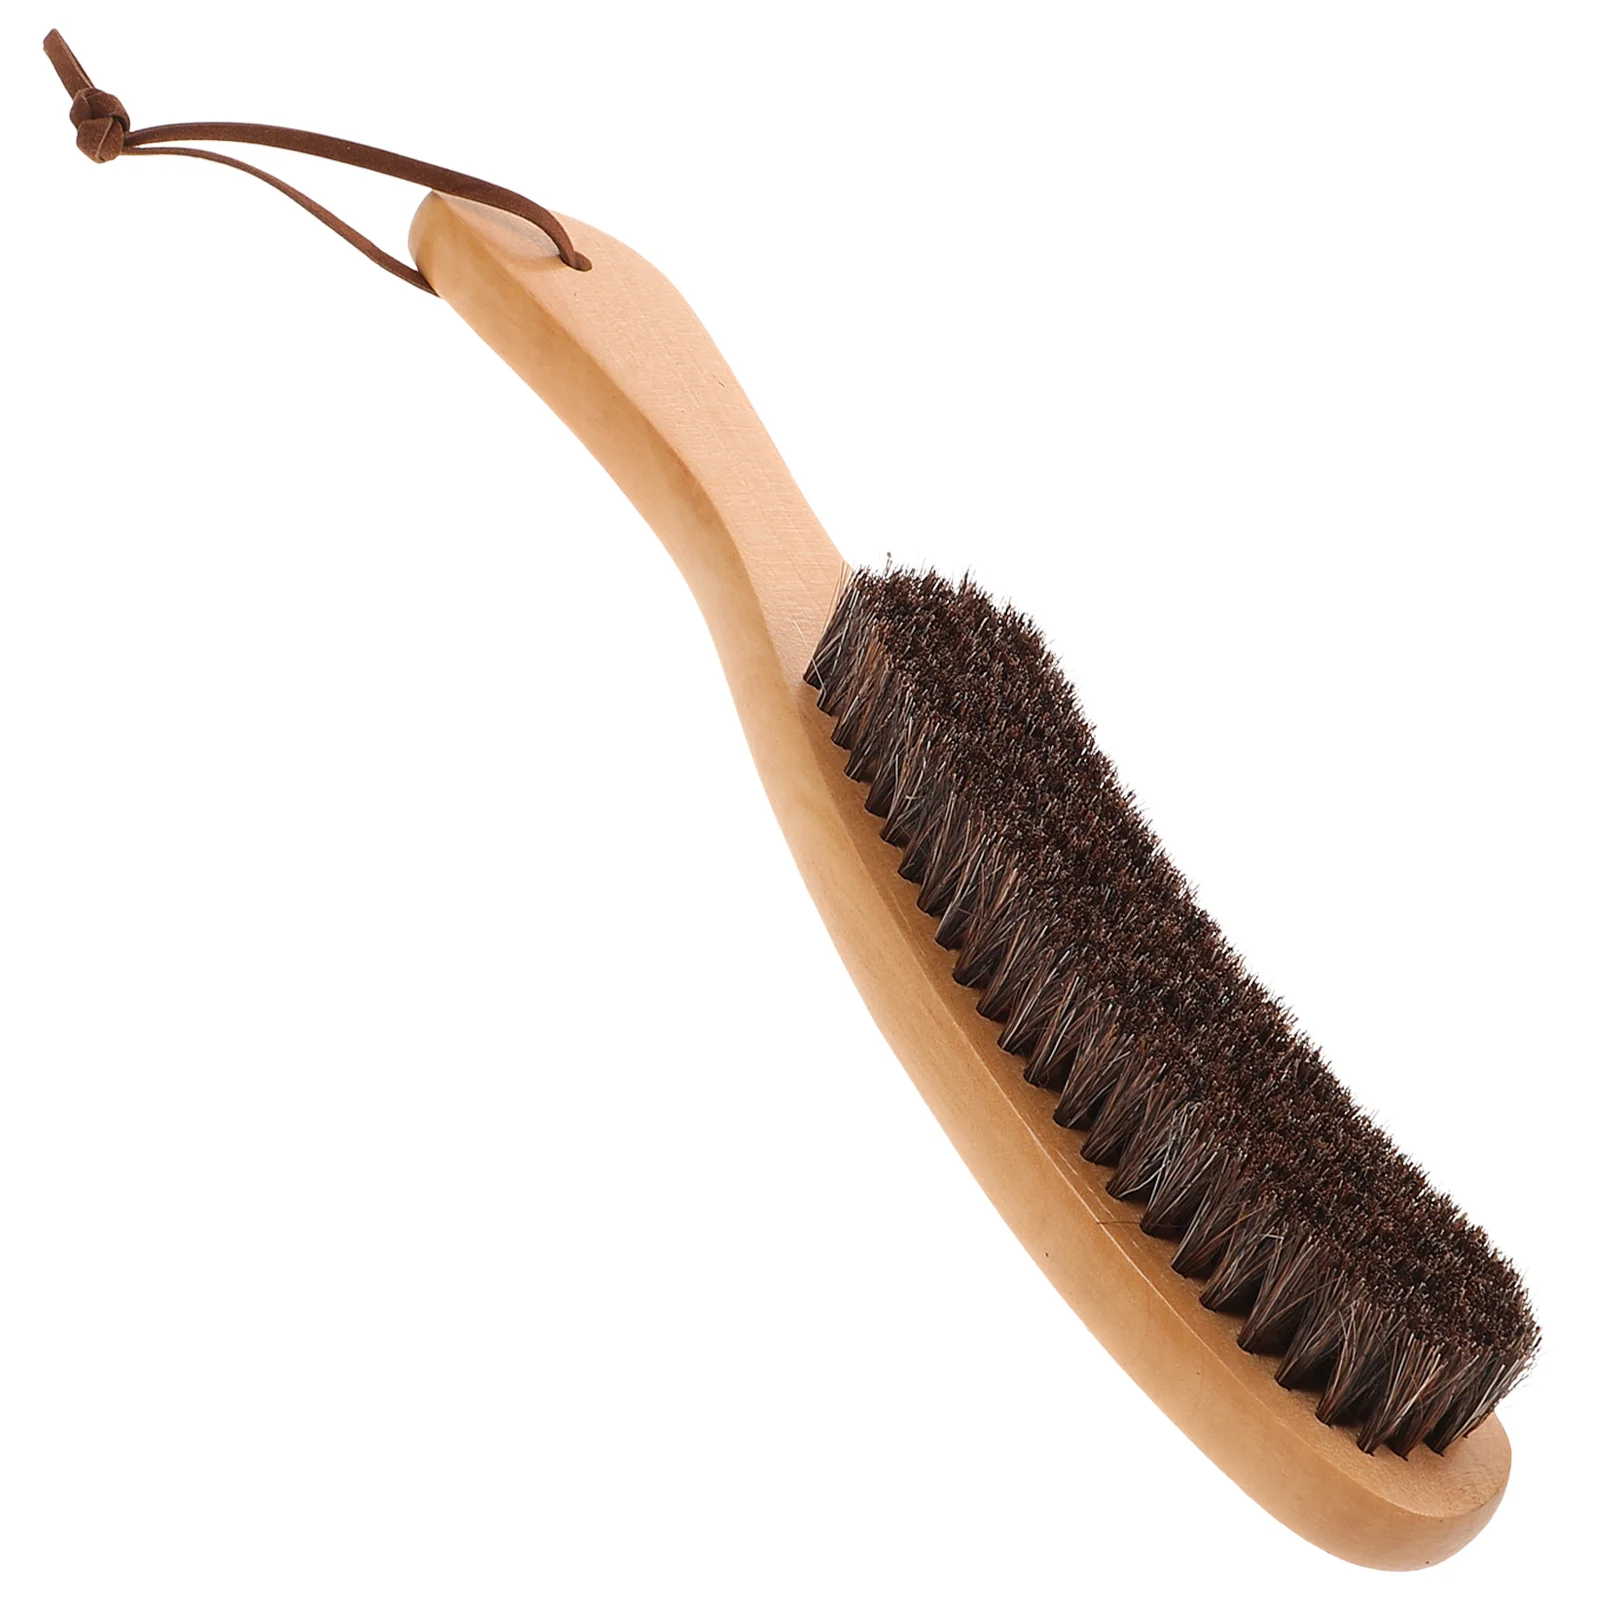 Horsehair Brush Wooden Cleaning Brush: Horsehair Shoe Shine Brush Horse Hair Bristles for Shoes Care